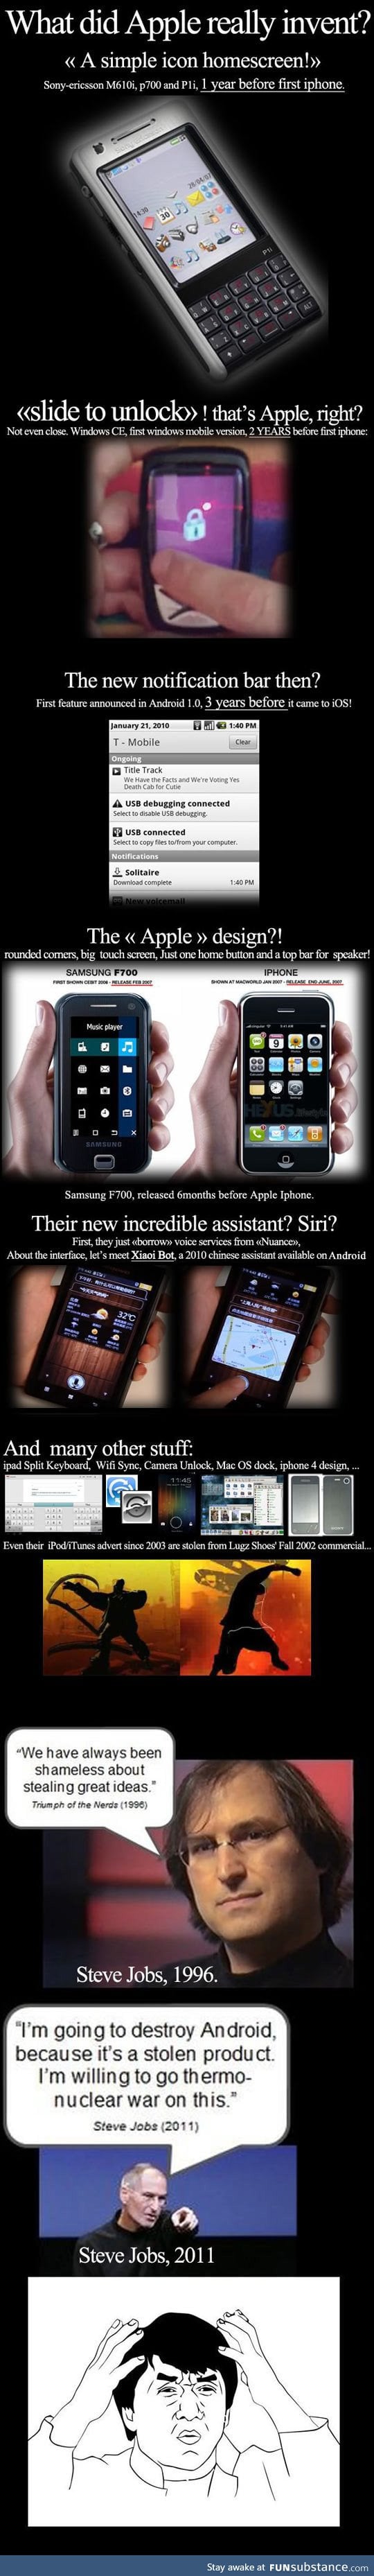 What apple actually invented